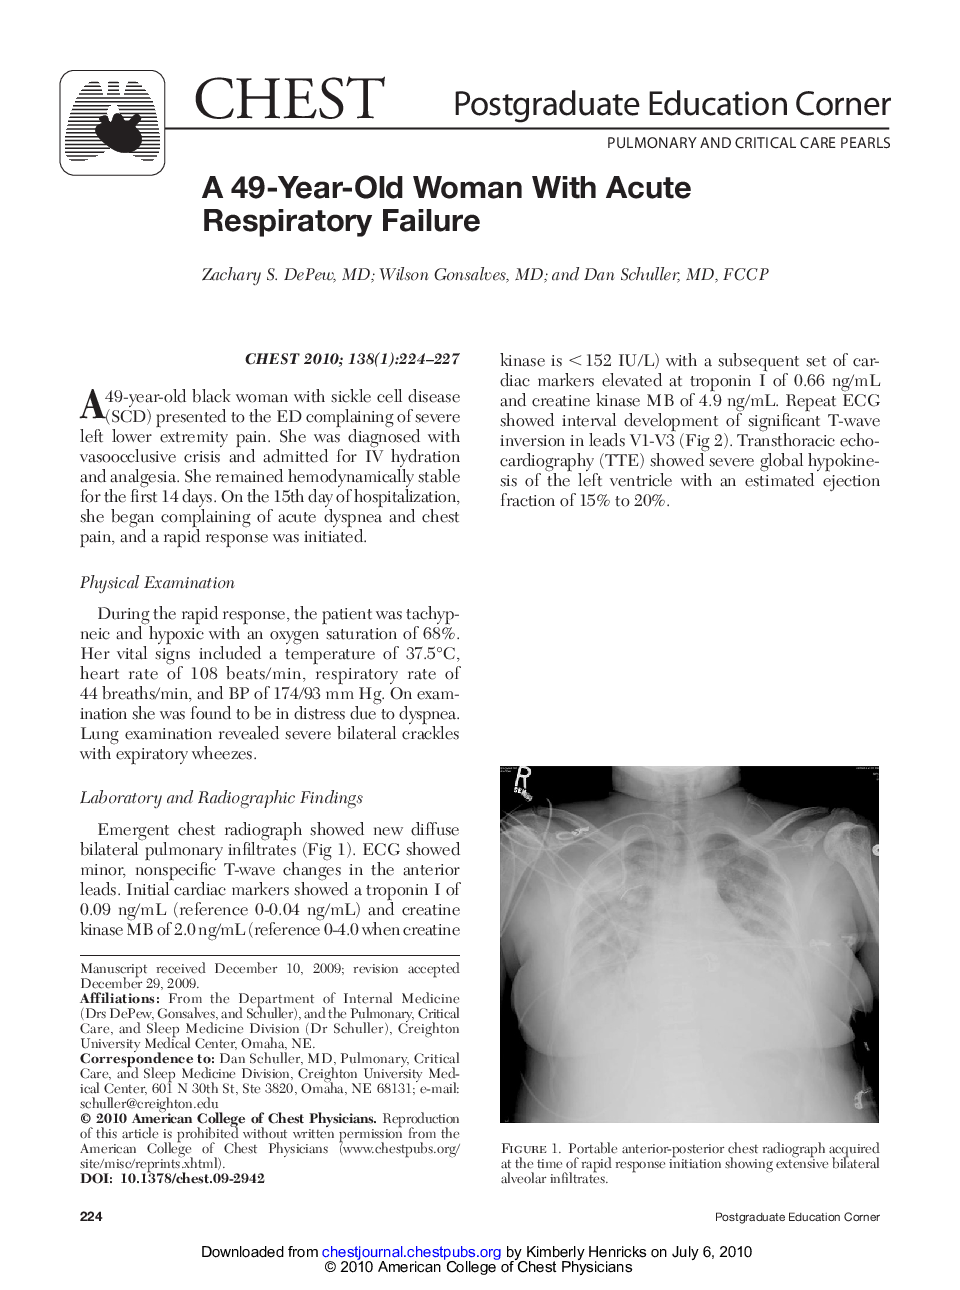 A 49-Year-Old Woman With Acute Respiratory Failure